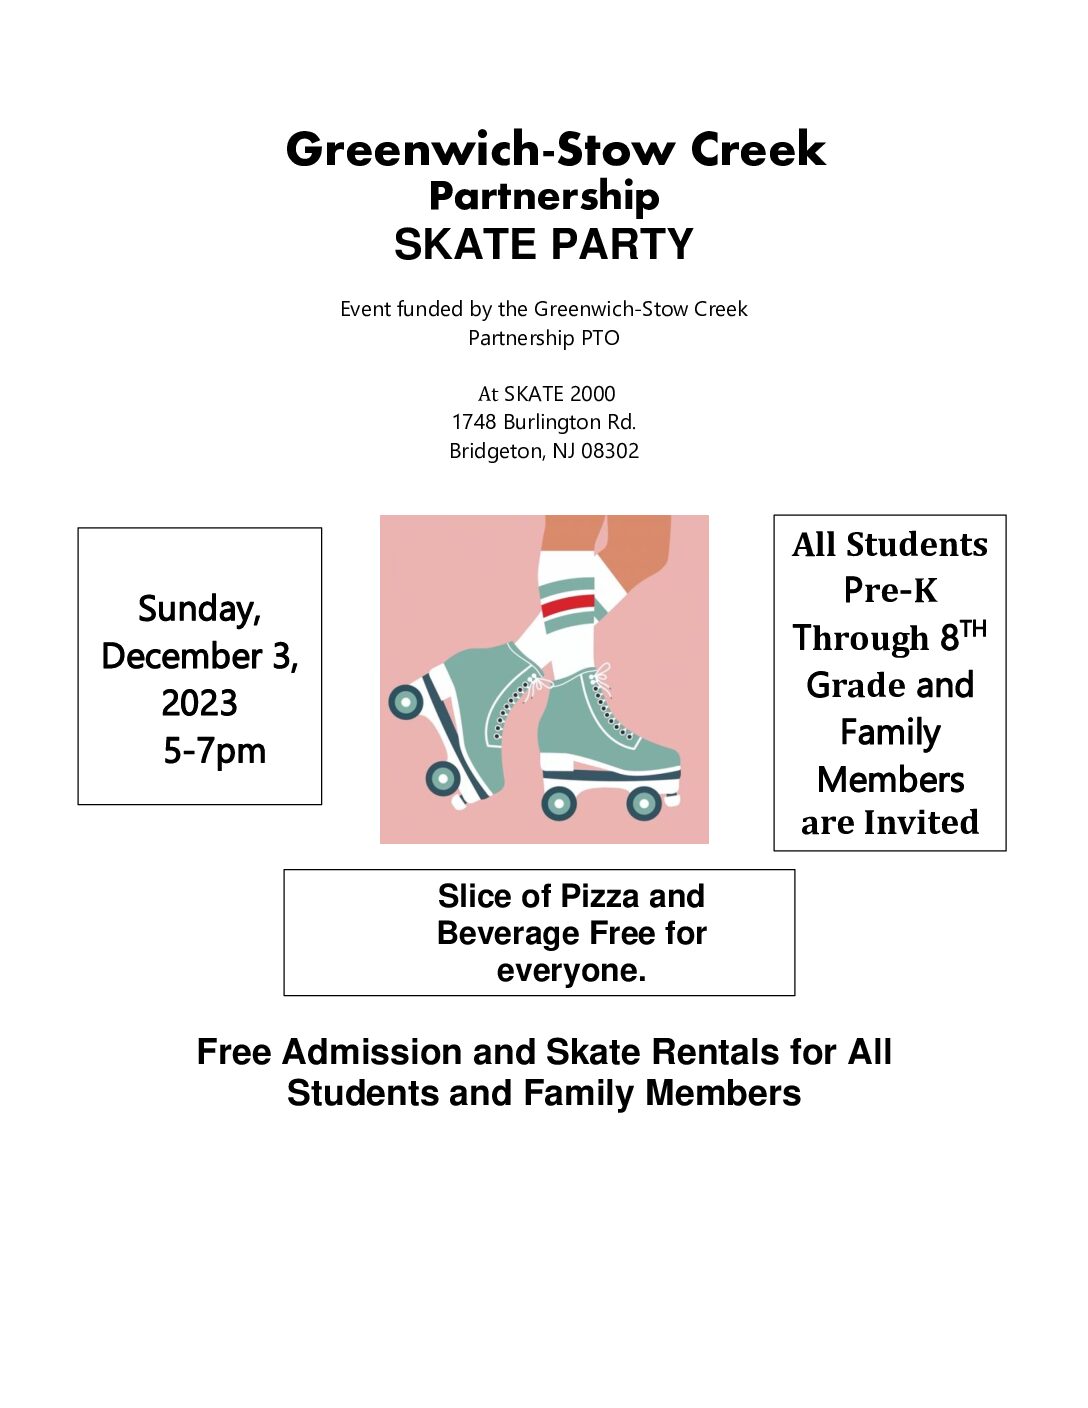 Holiday Skate Party